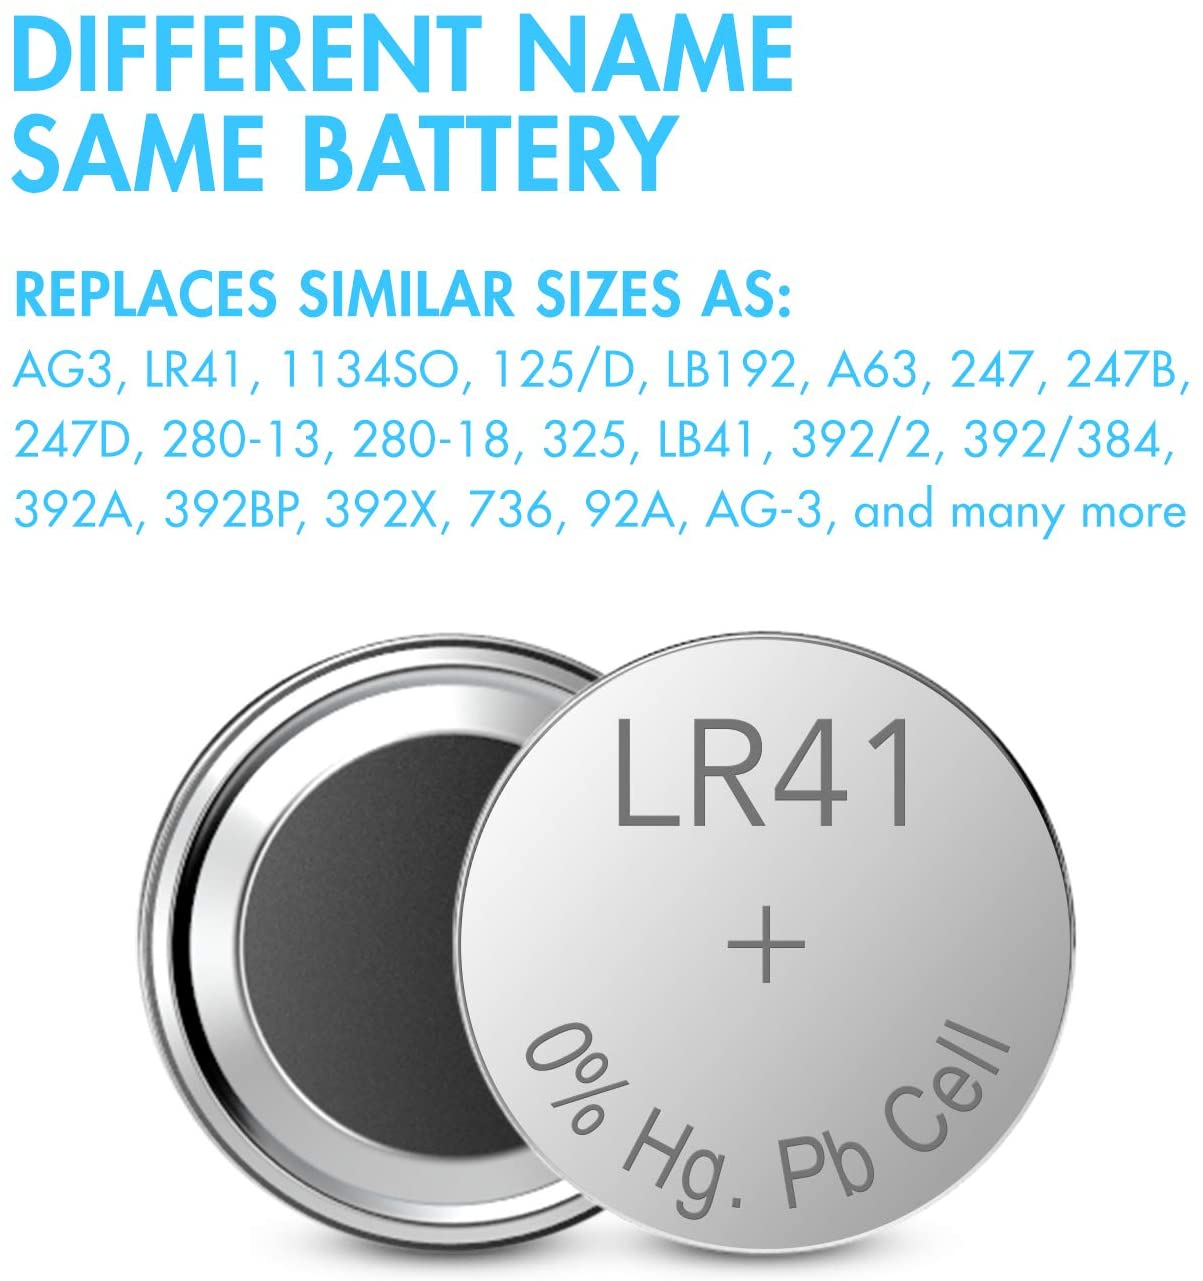 100 Pack Tenergy 1.5 Volt Battery Button Cell LR41, Ag3 Batteries Equivalent, Ideal for Thermometers, Watches, Laser Pointers, Small Toys, Portable Electronics, and More